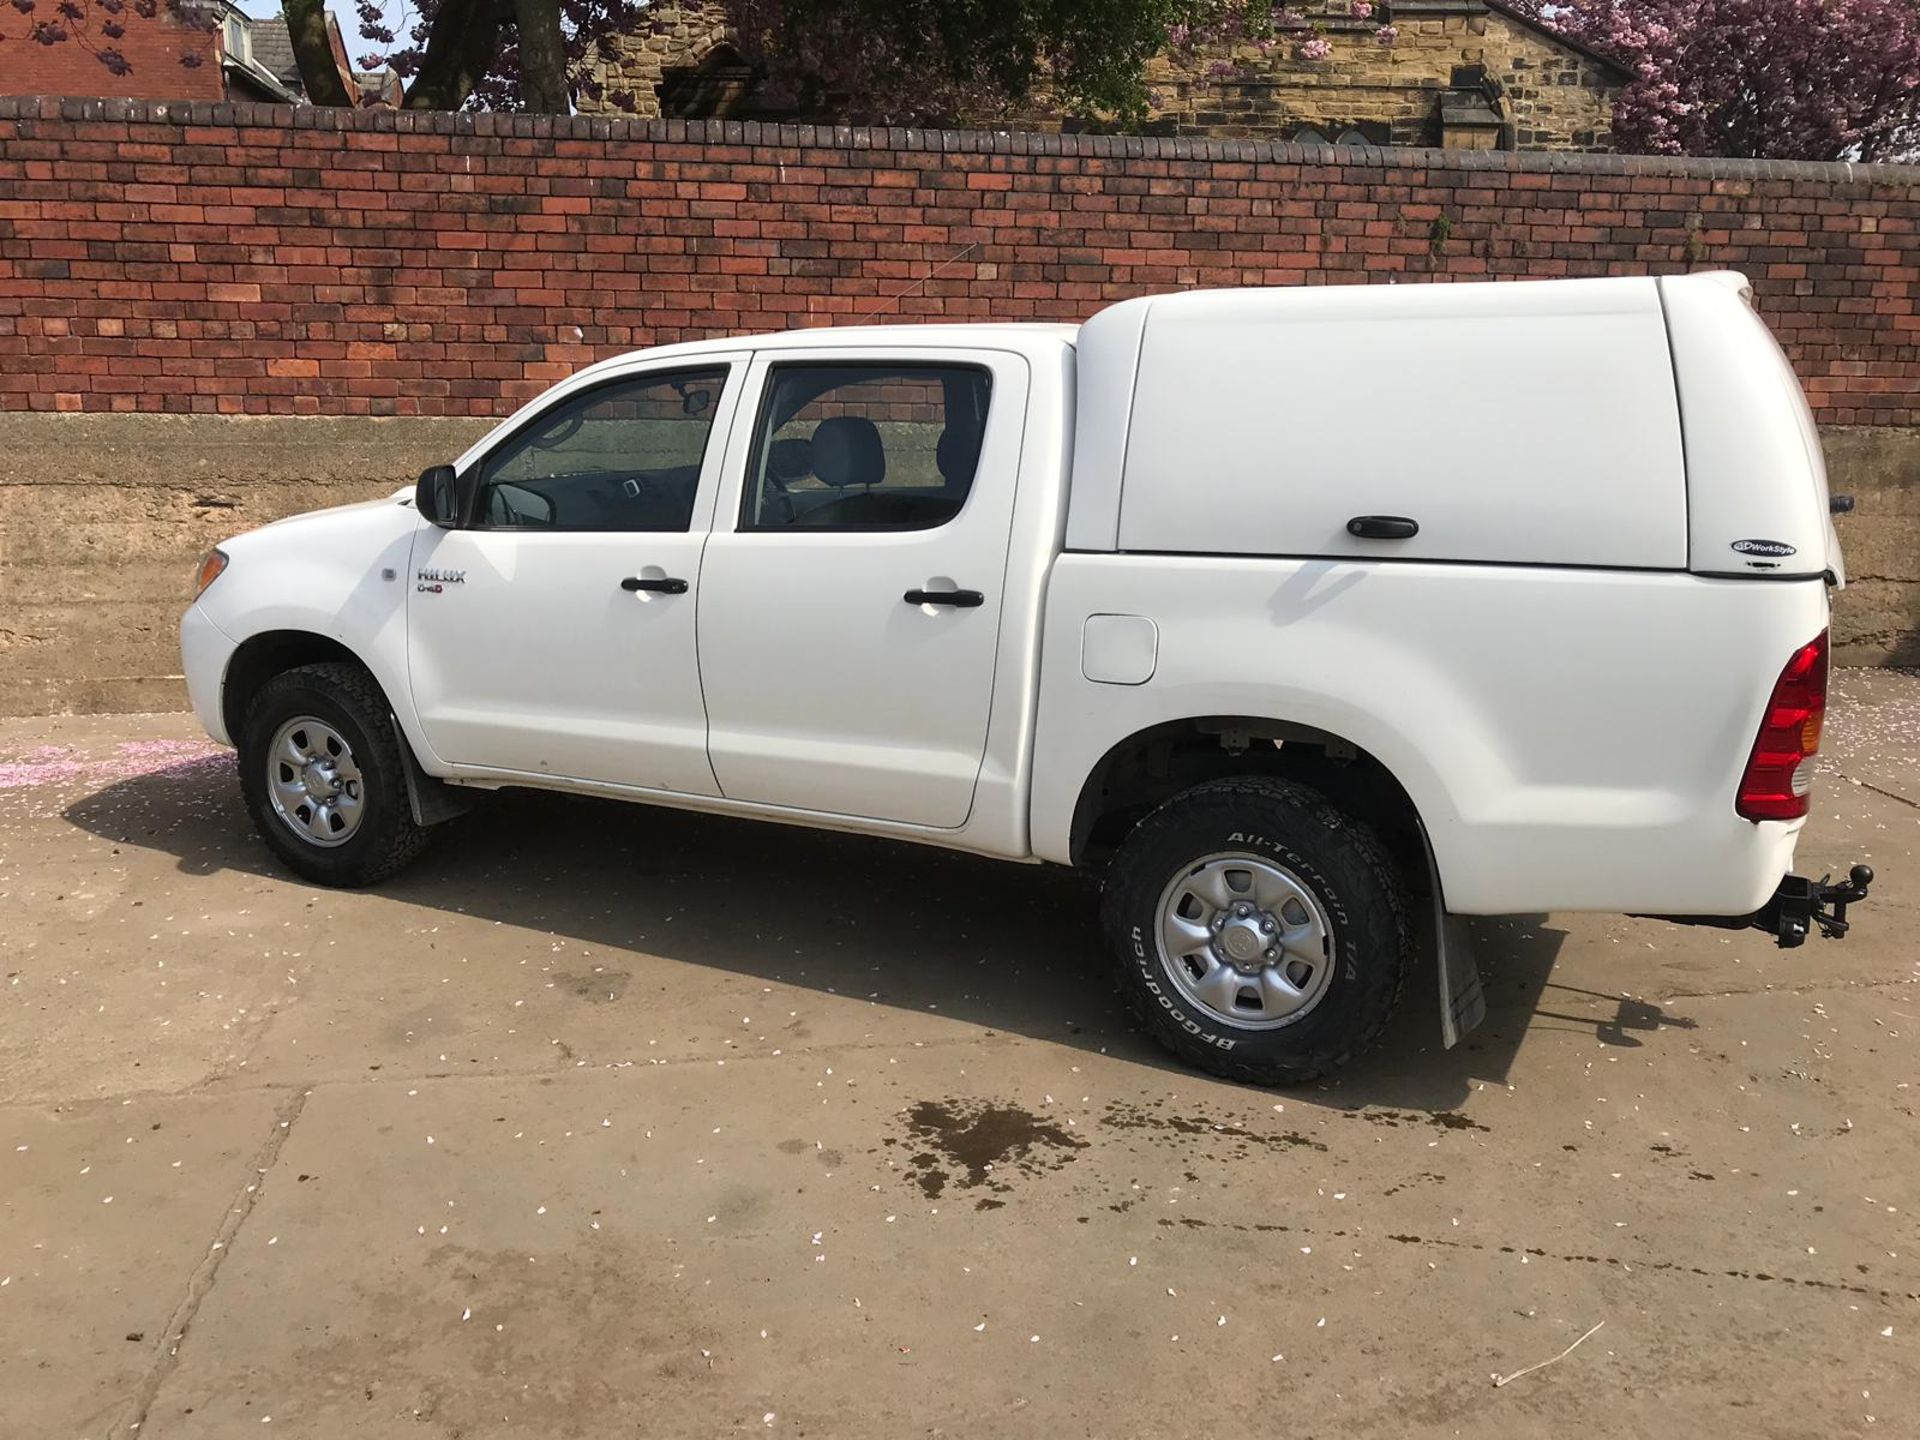 2008/58 REG TOYOTA HILUX HL2 D-4D 4X4 DOUBLE CAB PICK UP, SHOWING 0 FORMER KEEPERS *PLUS VAT* - Image 3 of 18